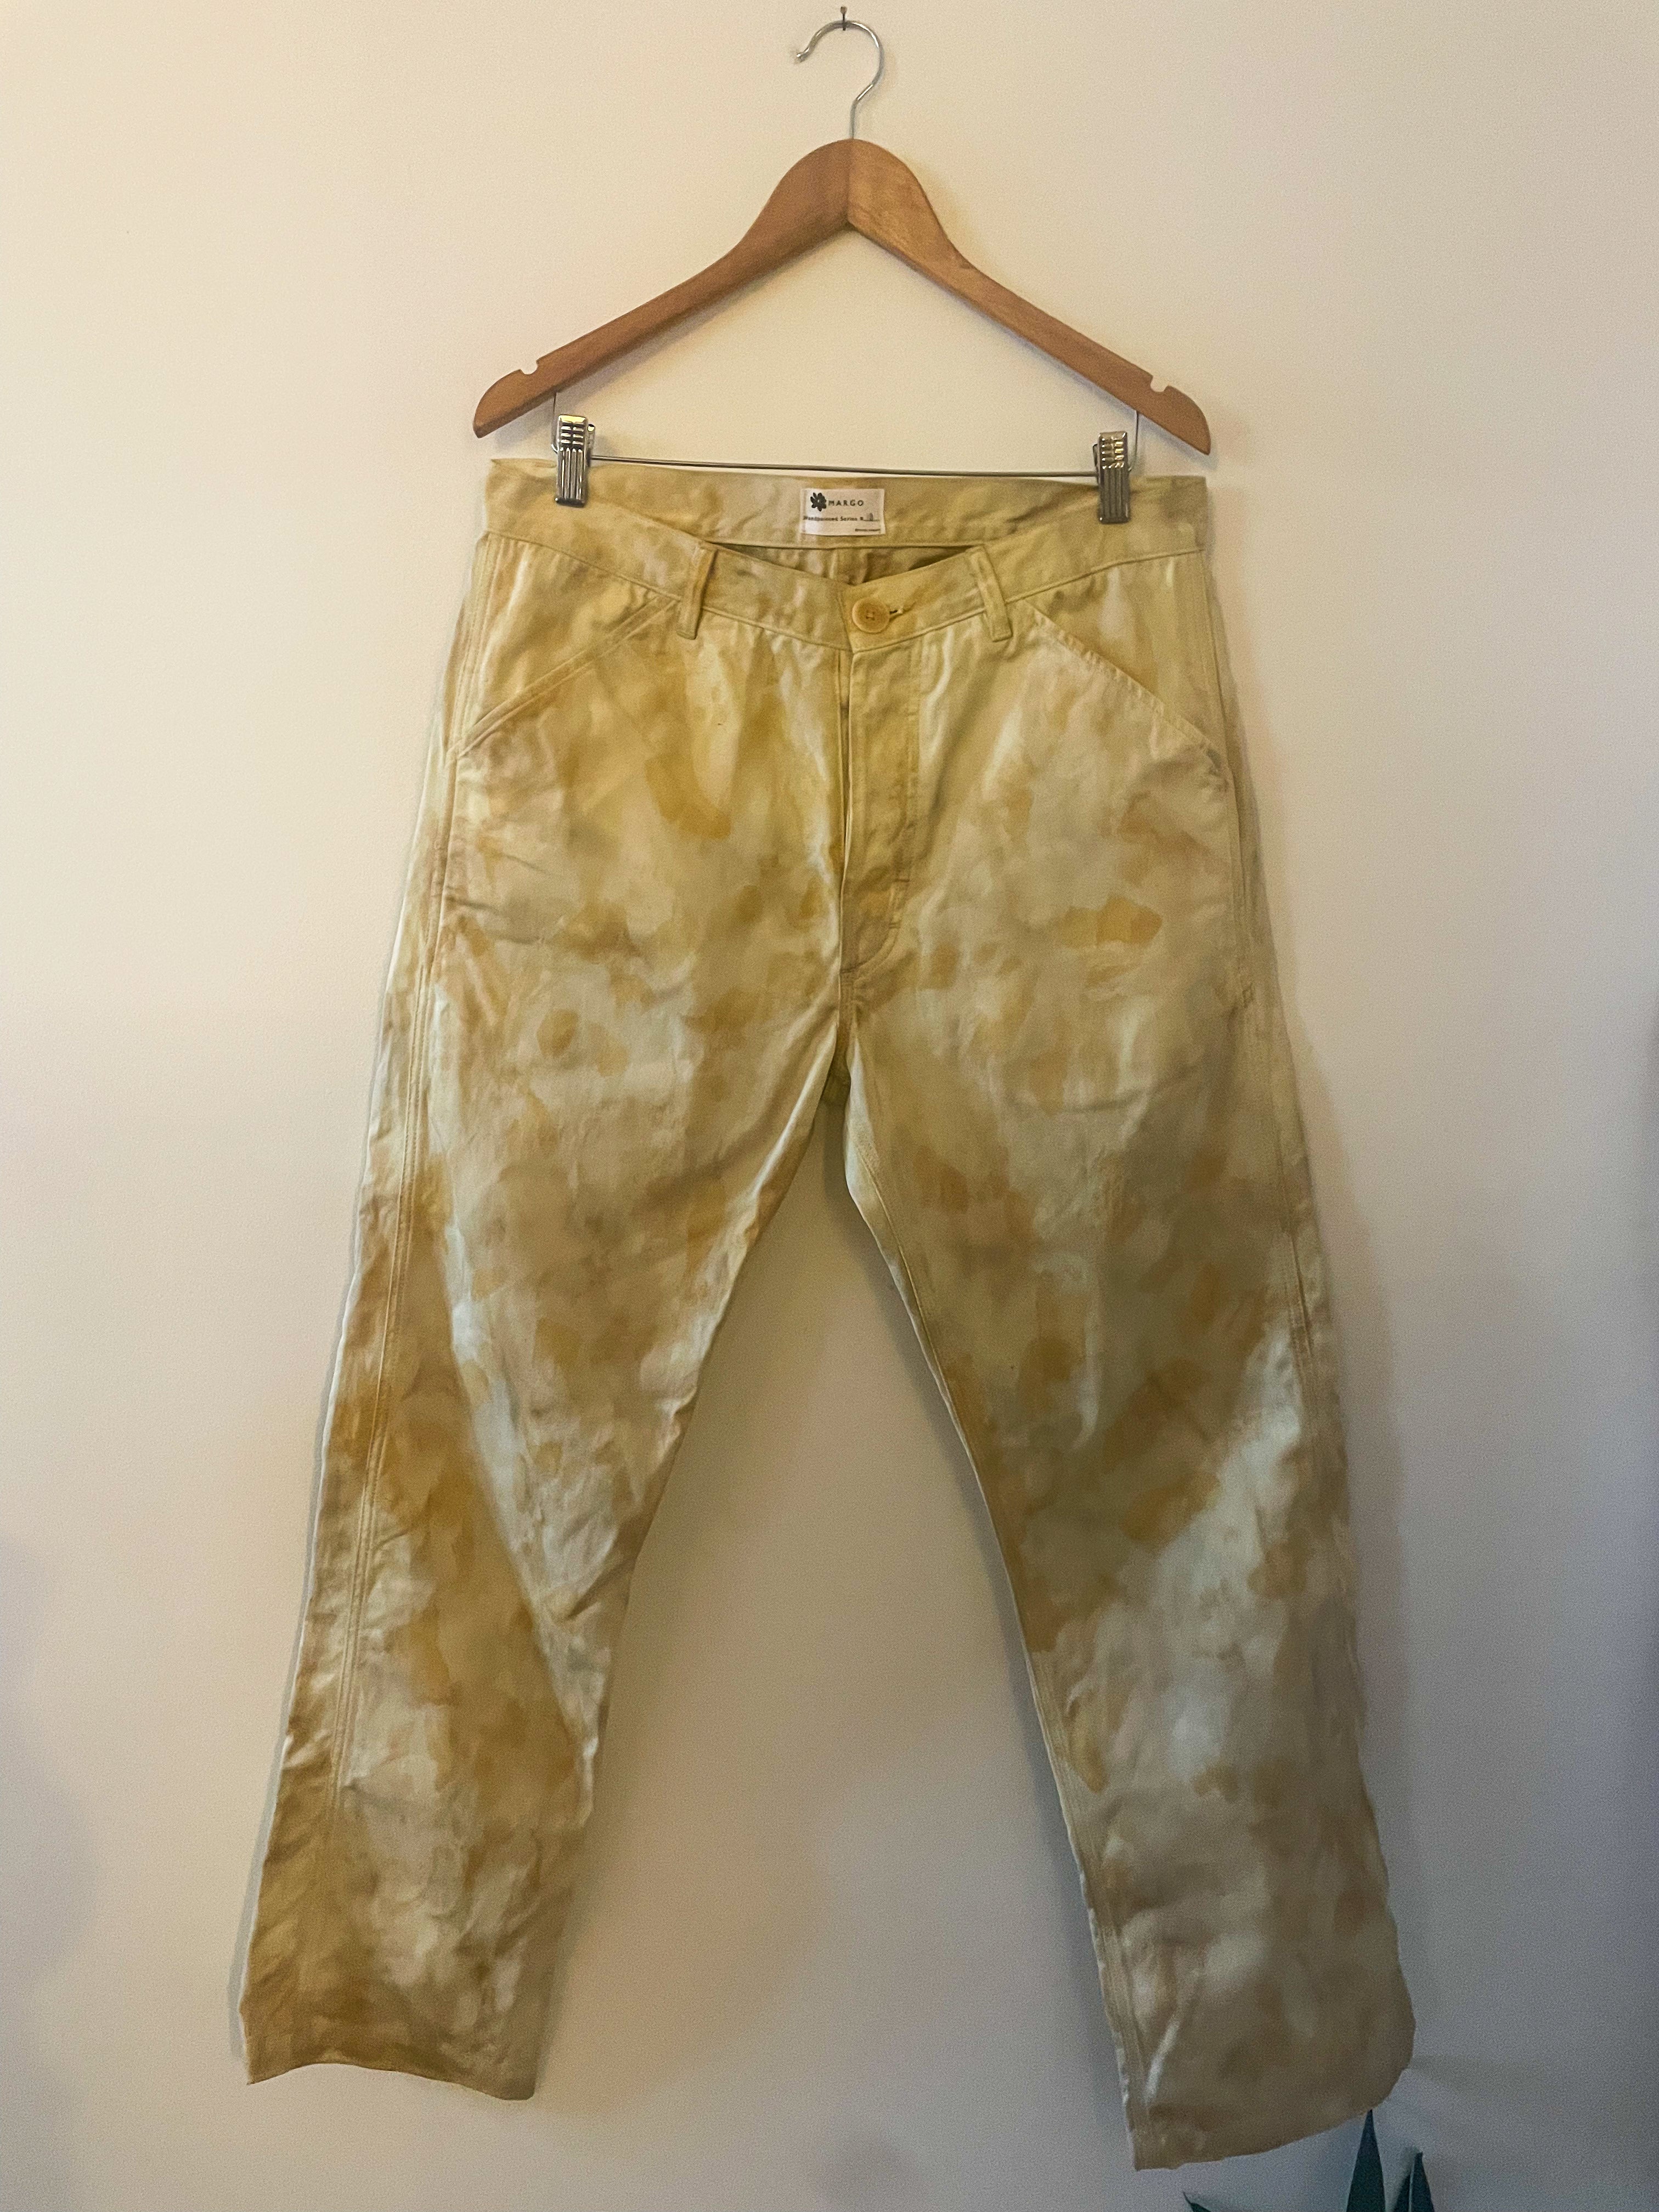 Hand-Dyed & Painted Cotton Twill Trousers - Carrot Tops